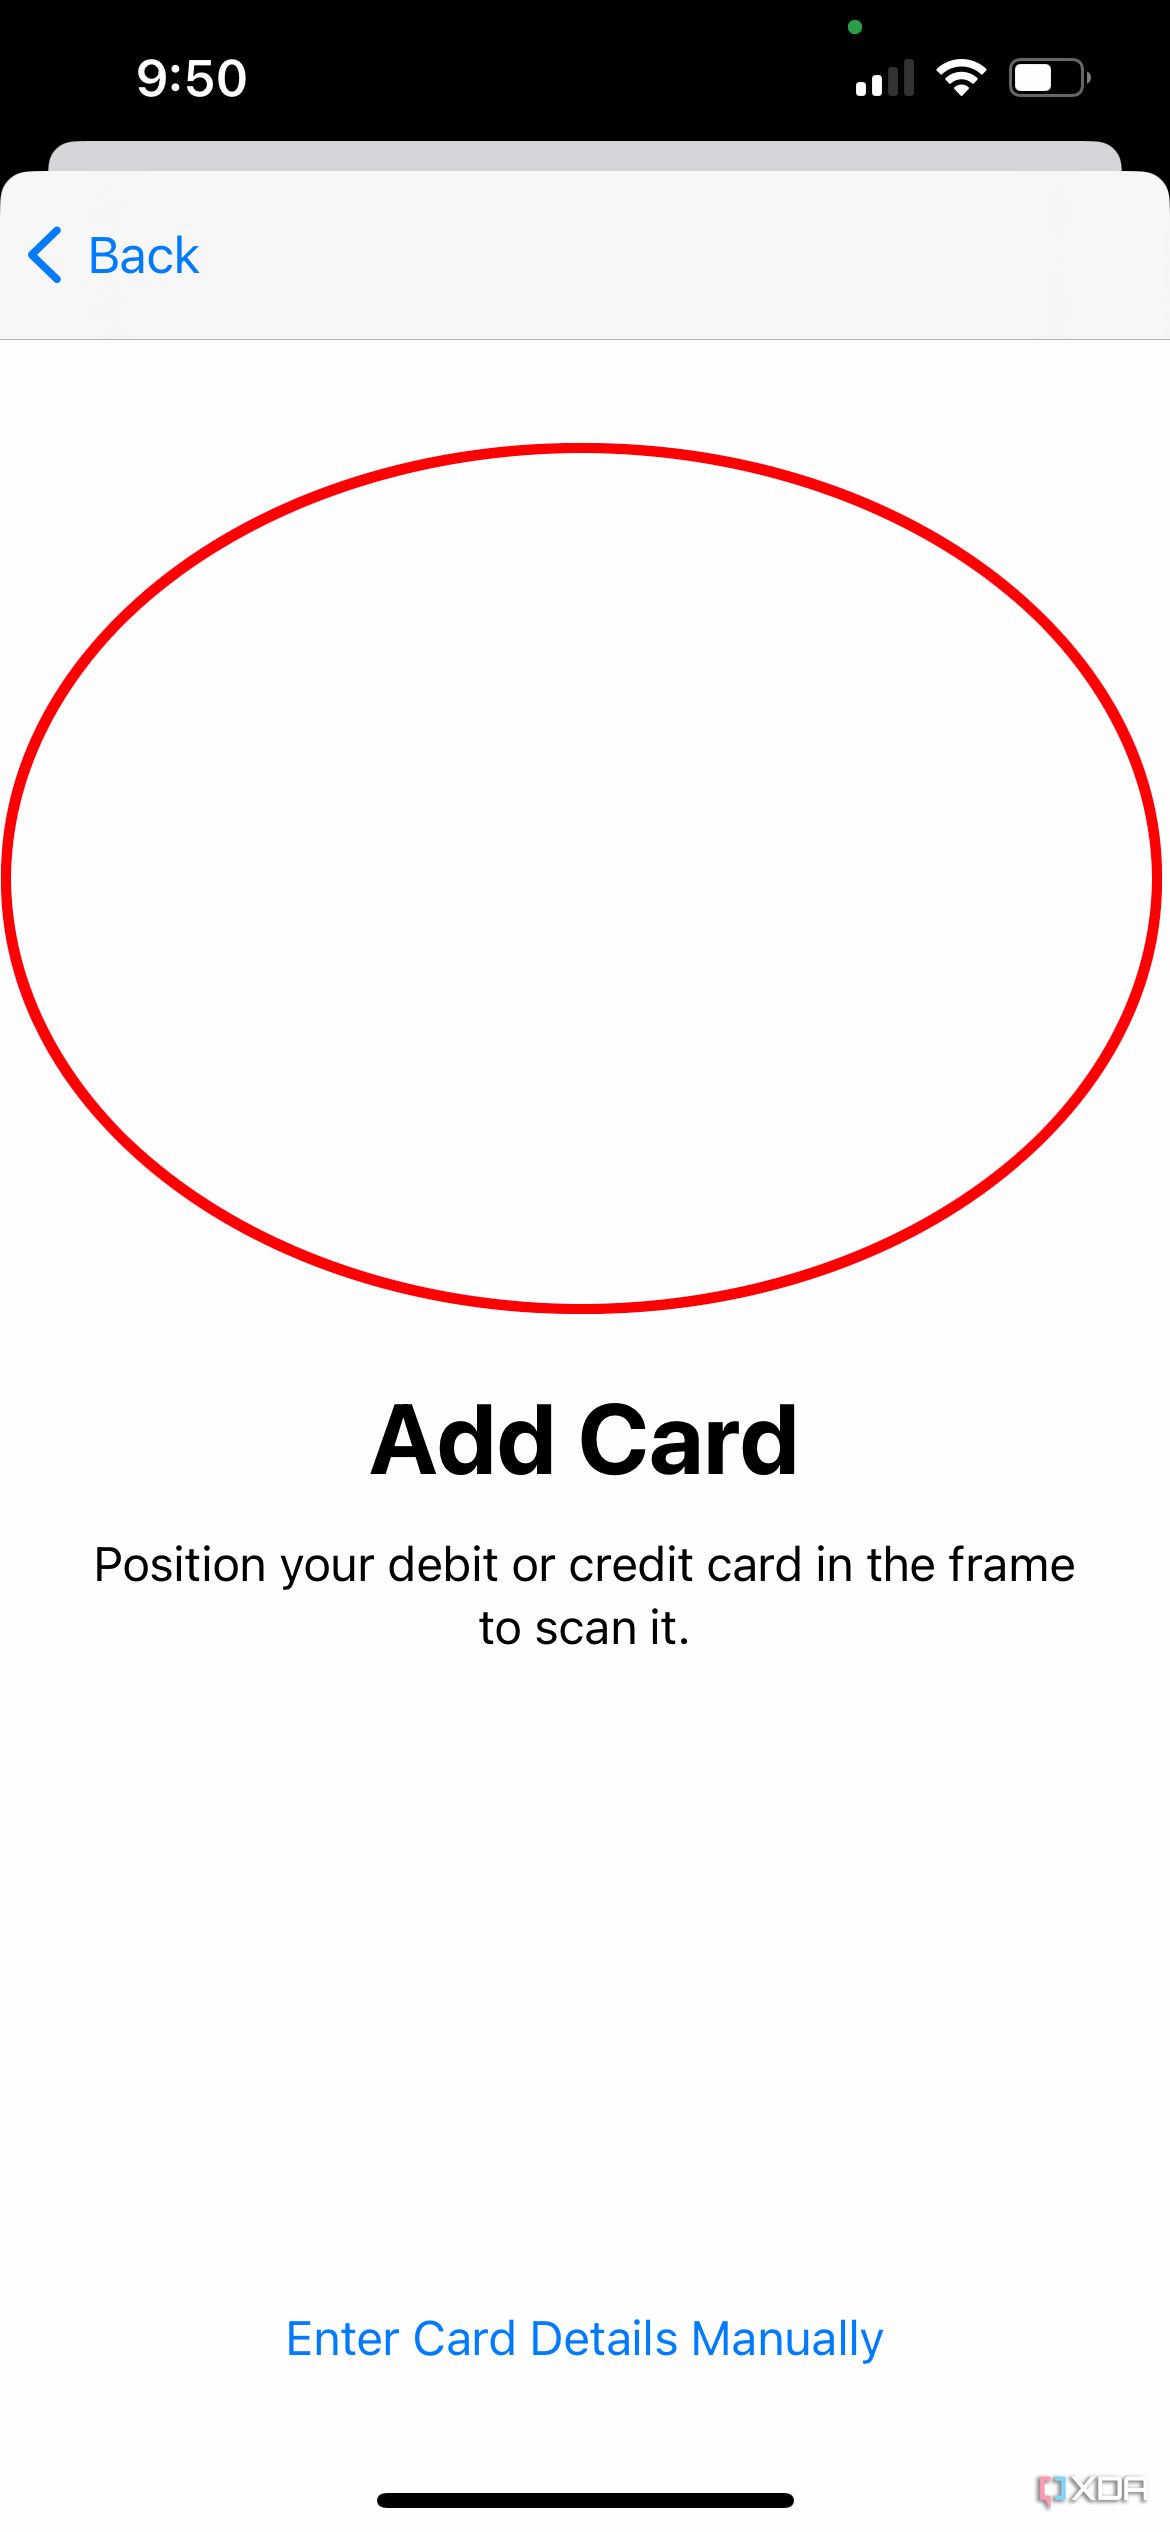 The Add Card screen in Apple Wallet showing where a card would be added.